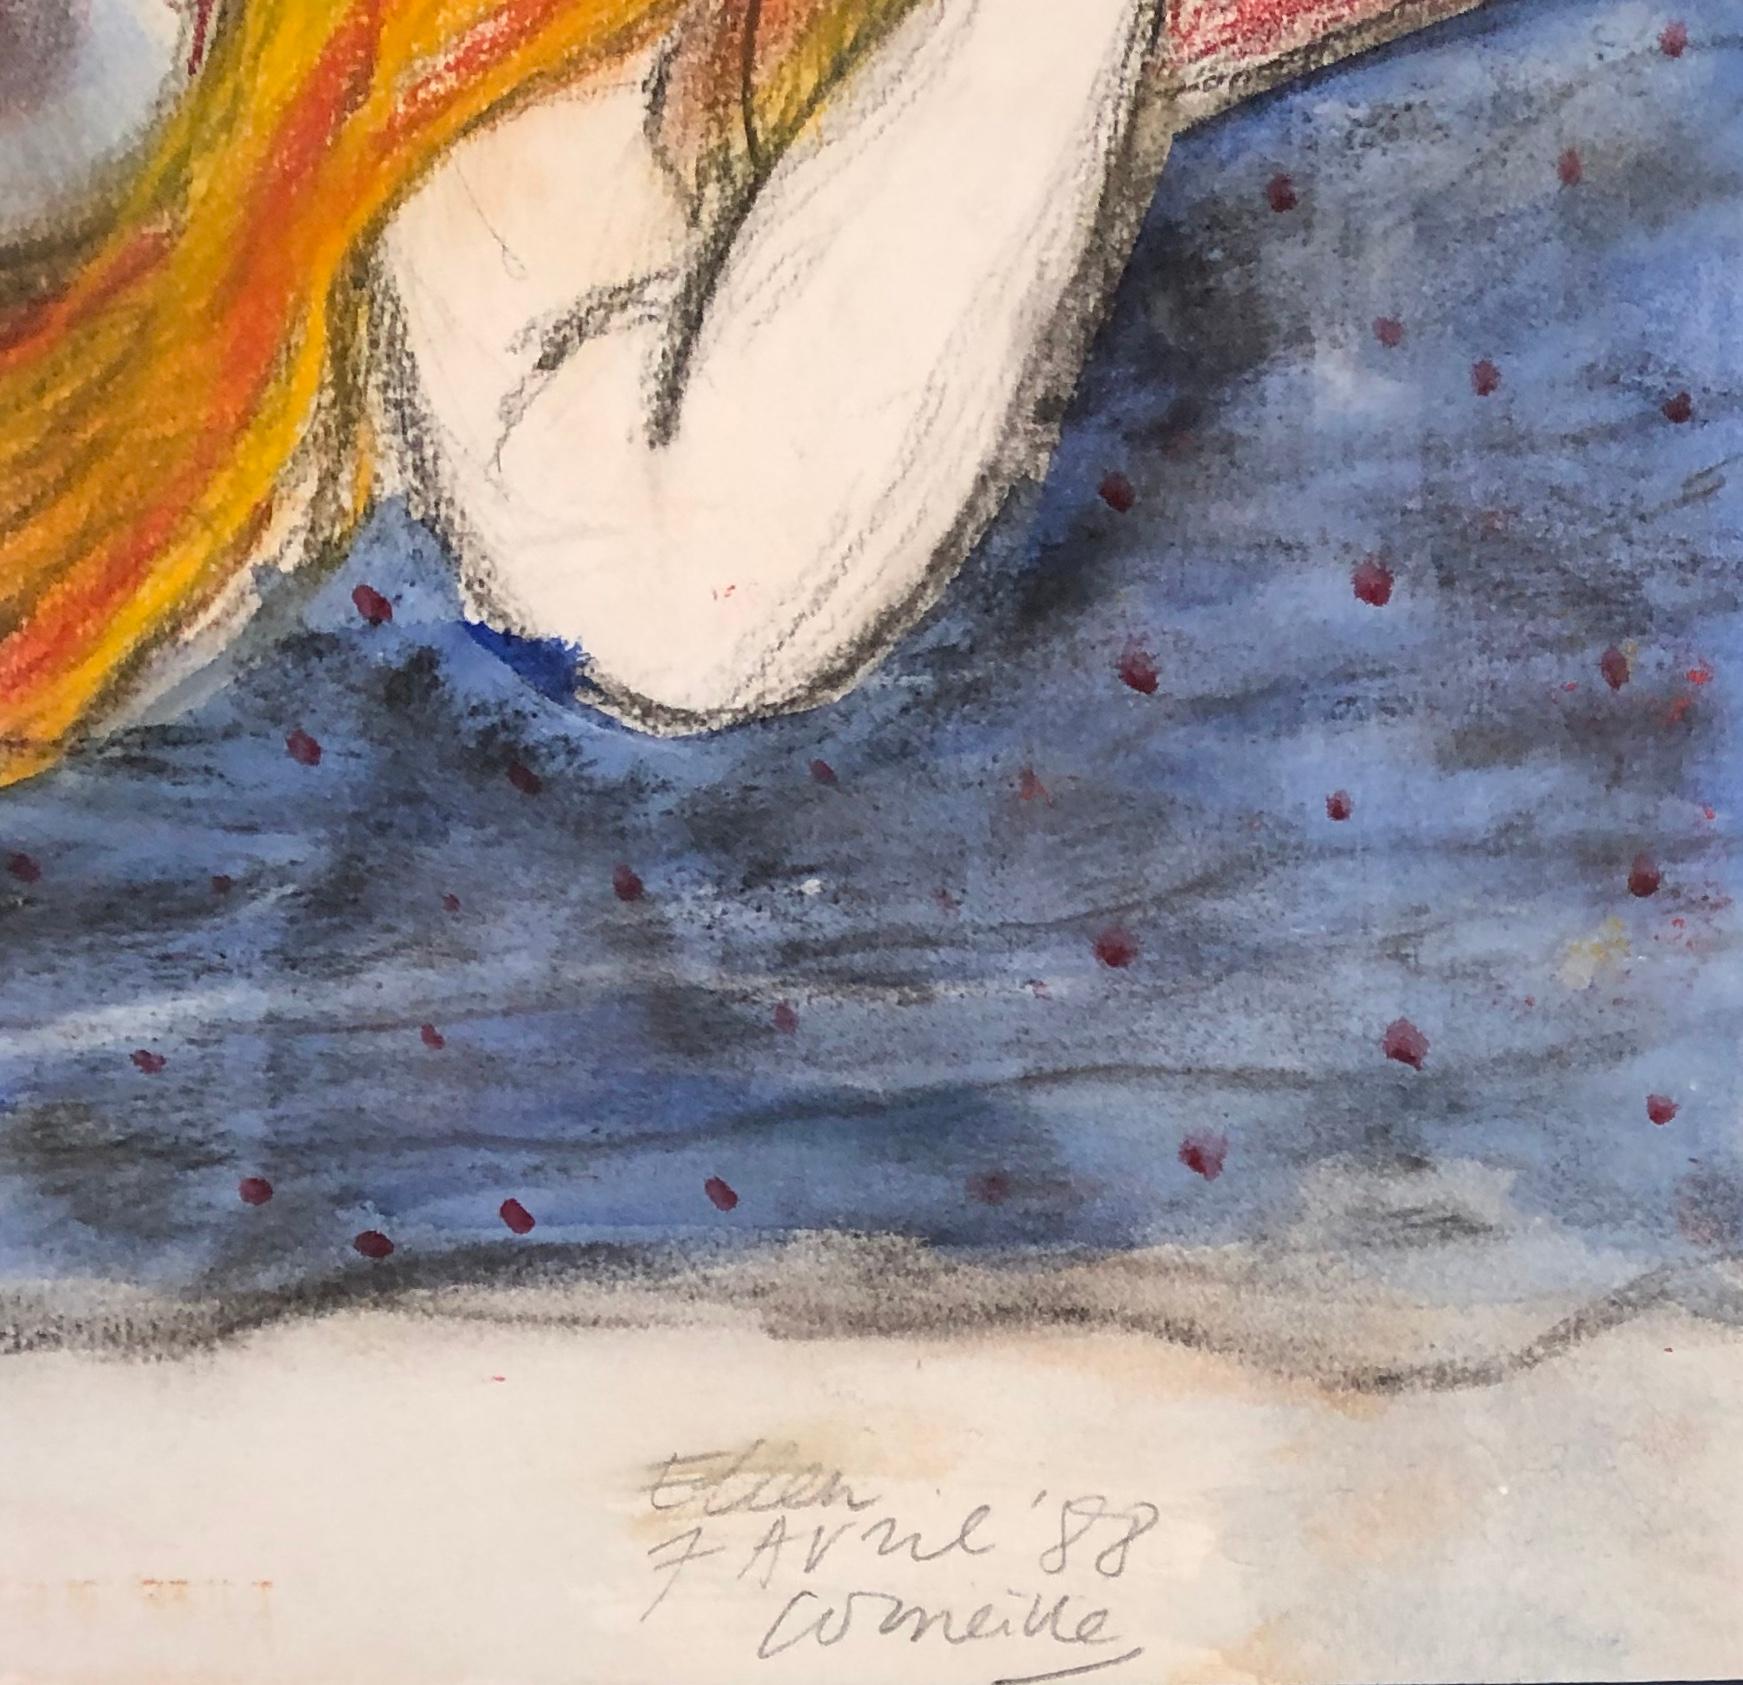 Red headed woman. Coloured pencil. Signed and dated '7th of April (19)88'. - Other Art Style Art by Guillaume Cornelis van Beverloo (Corneille)